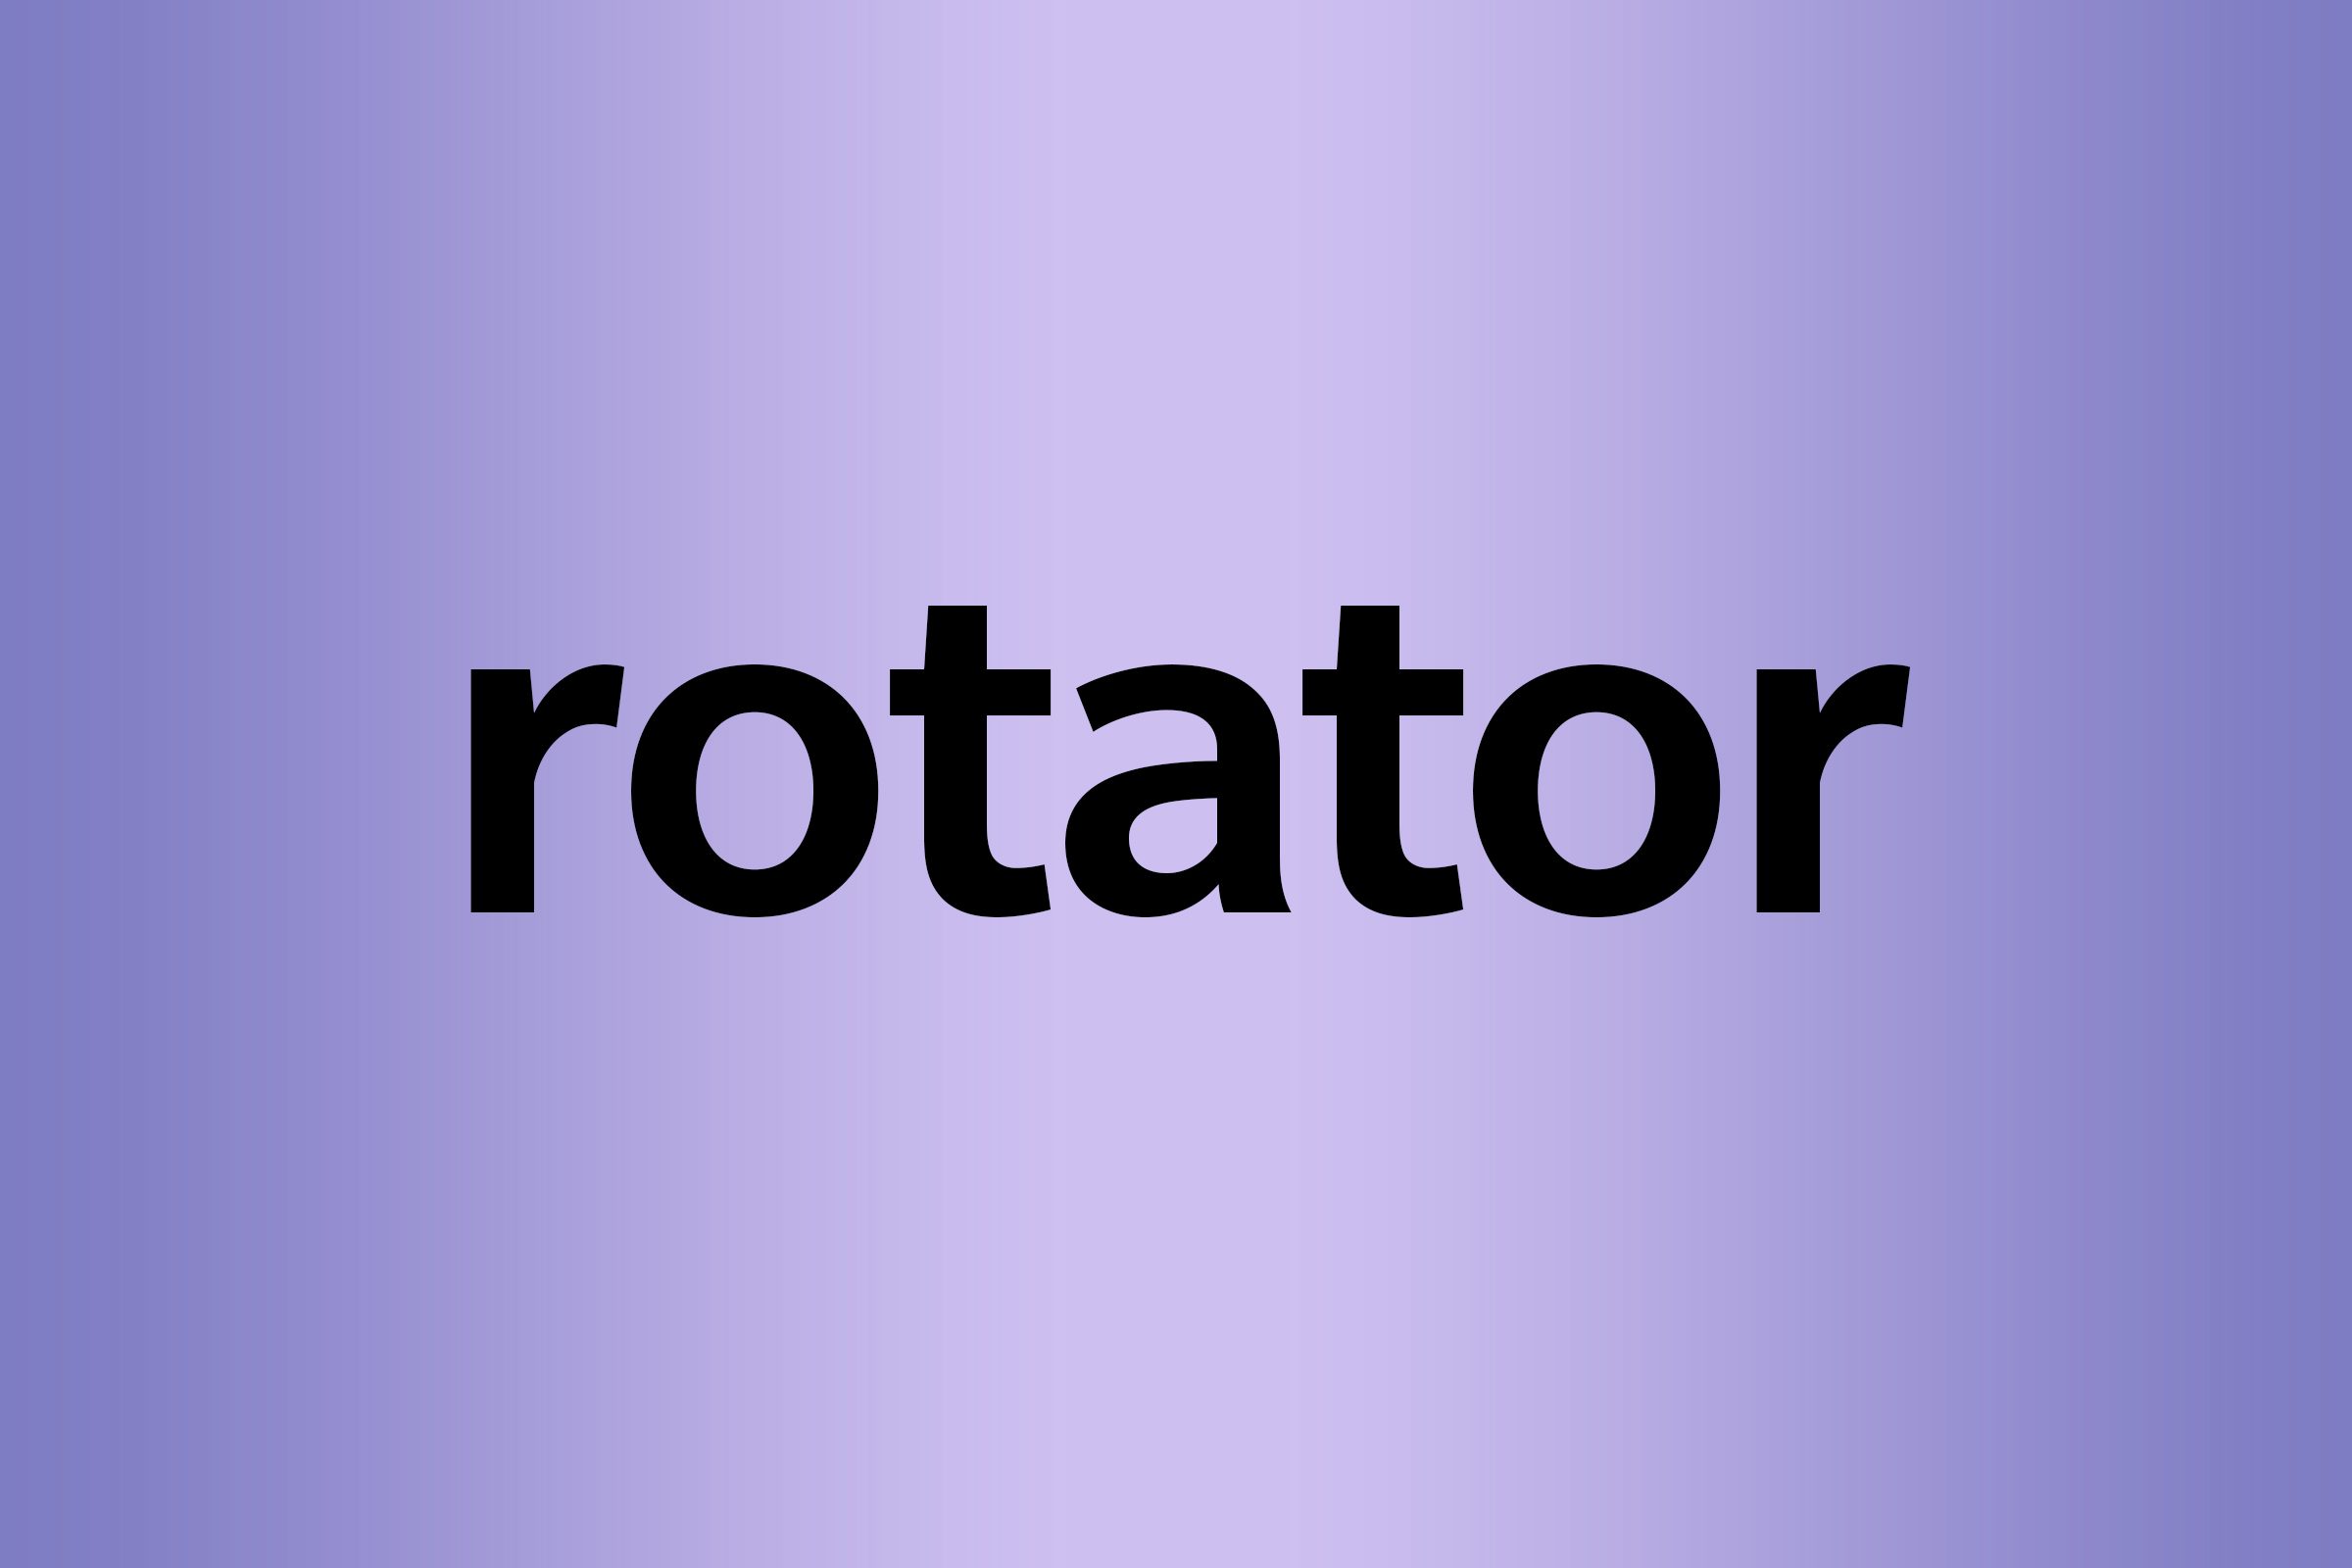 What is a palindrome rotator